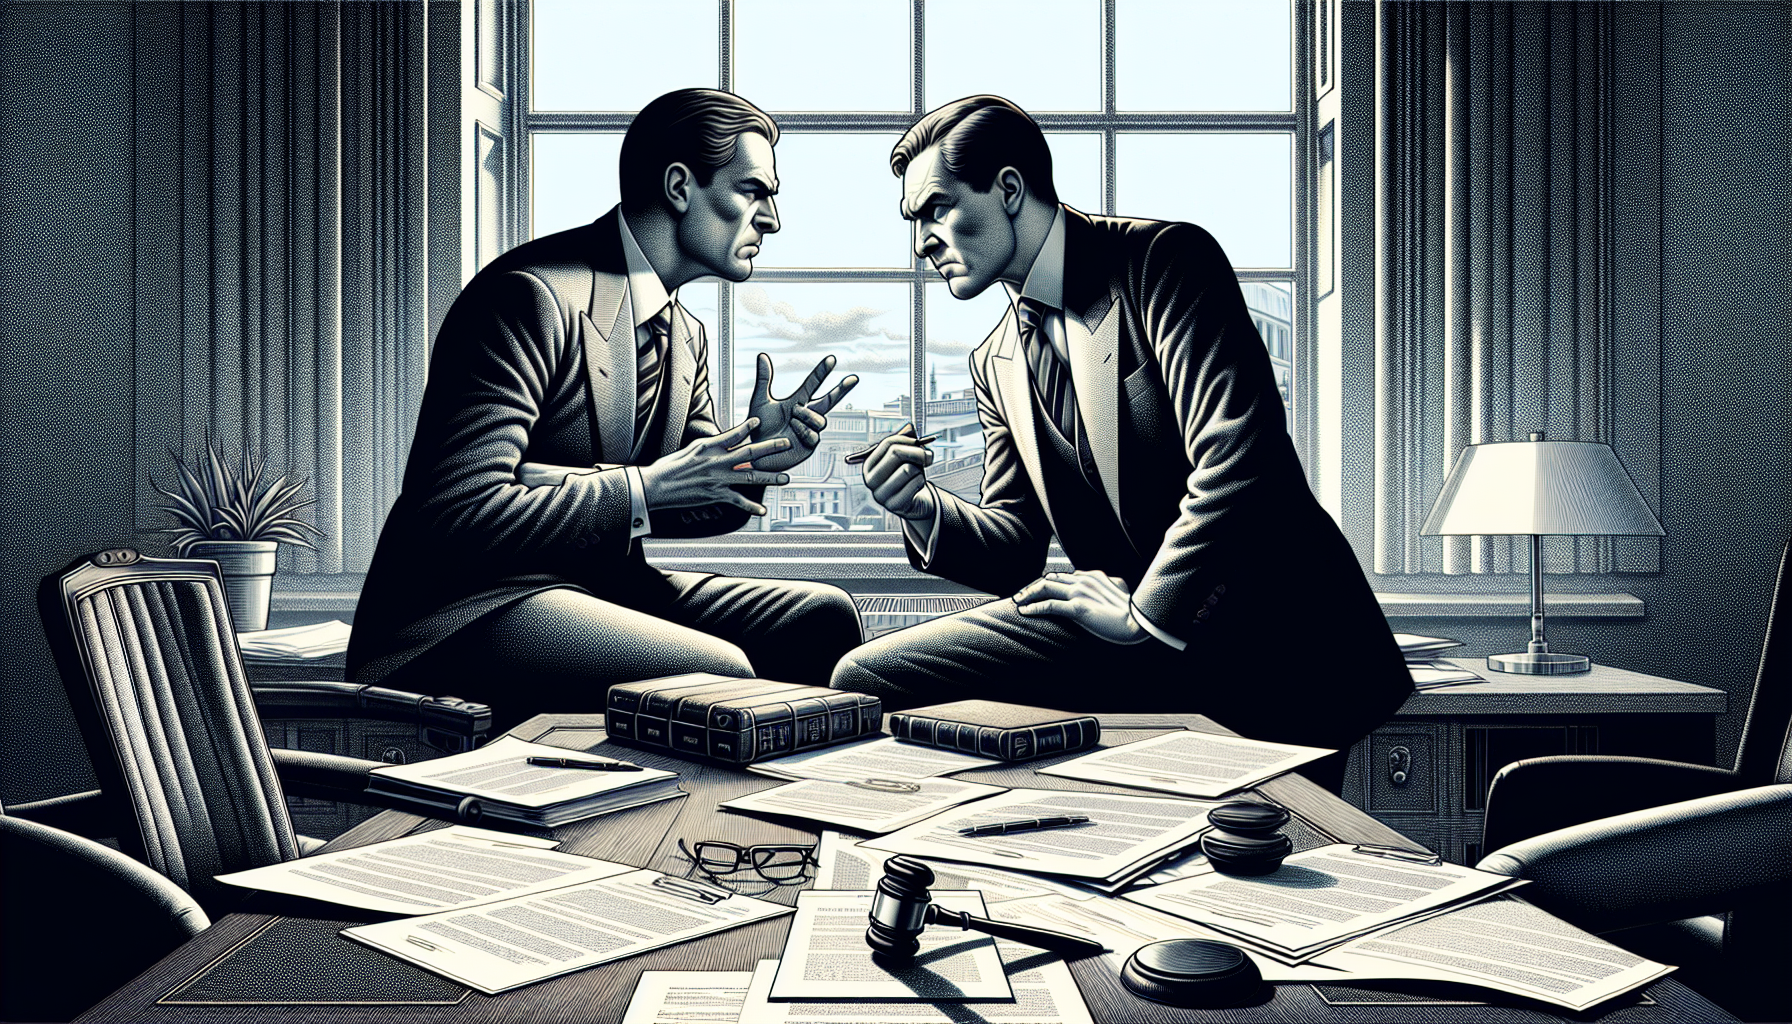 Illustration of two business people in a heated discussion